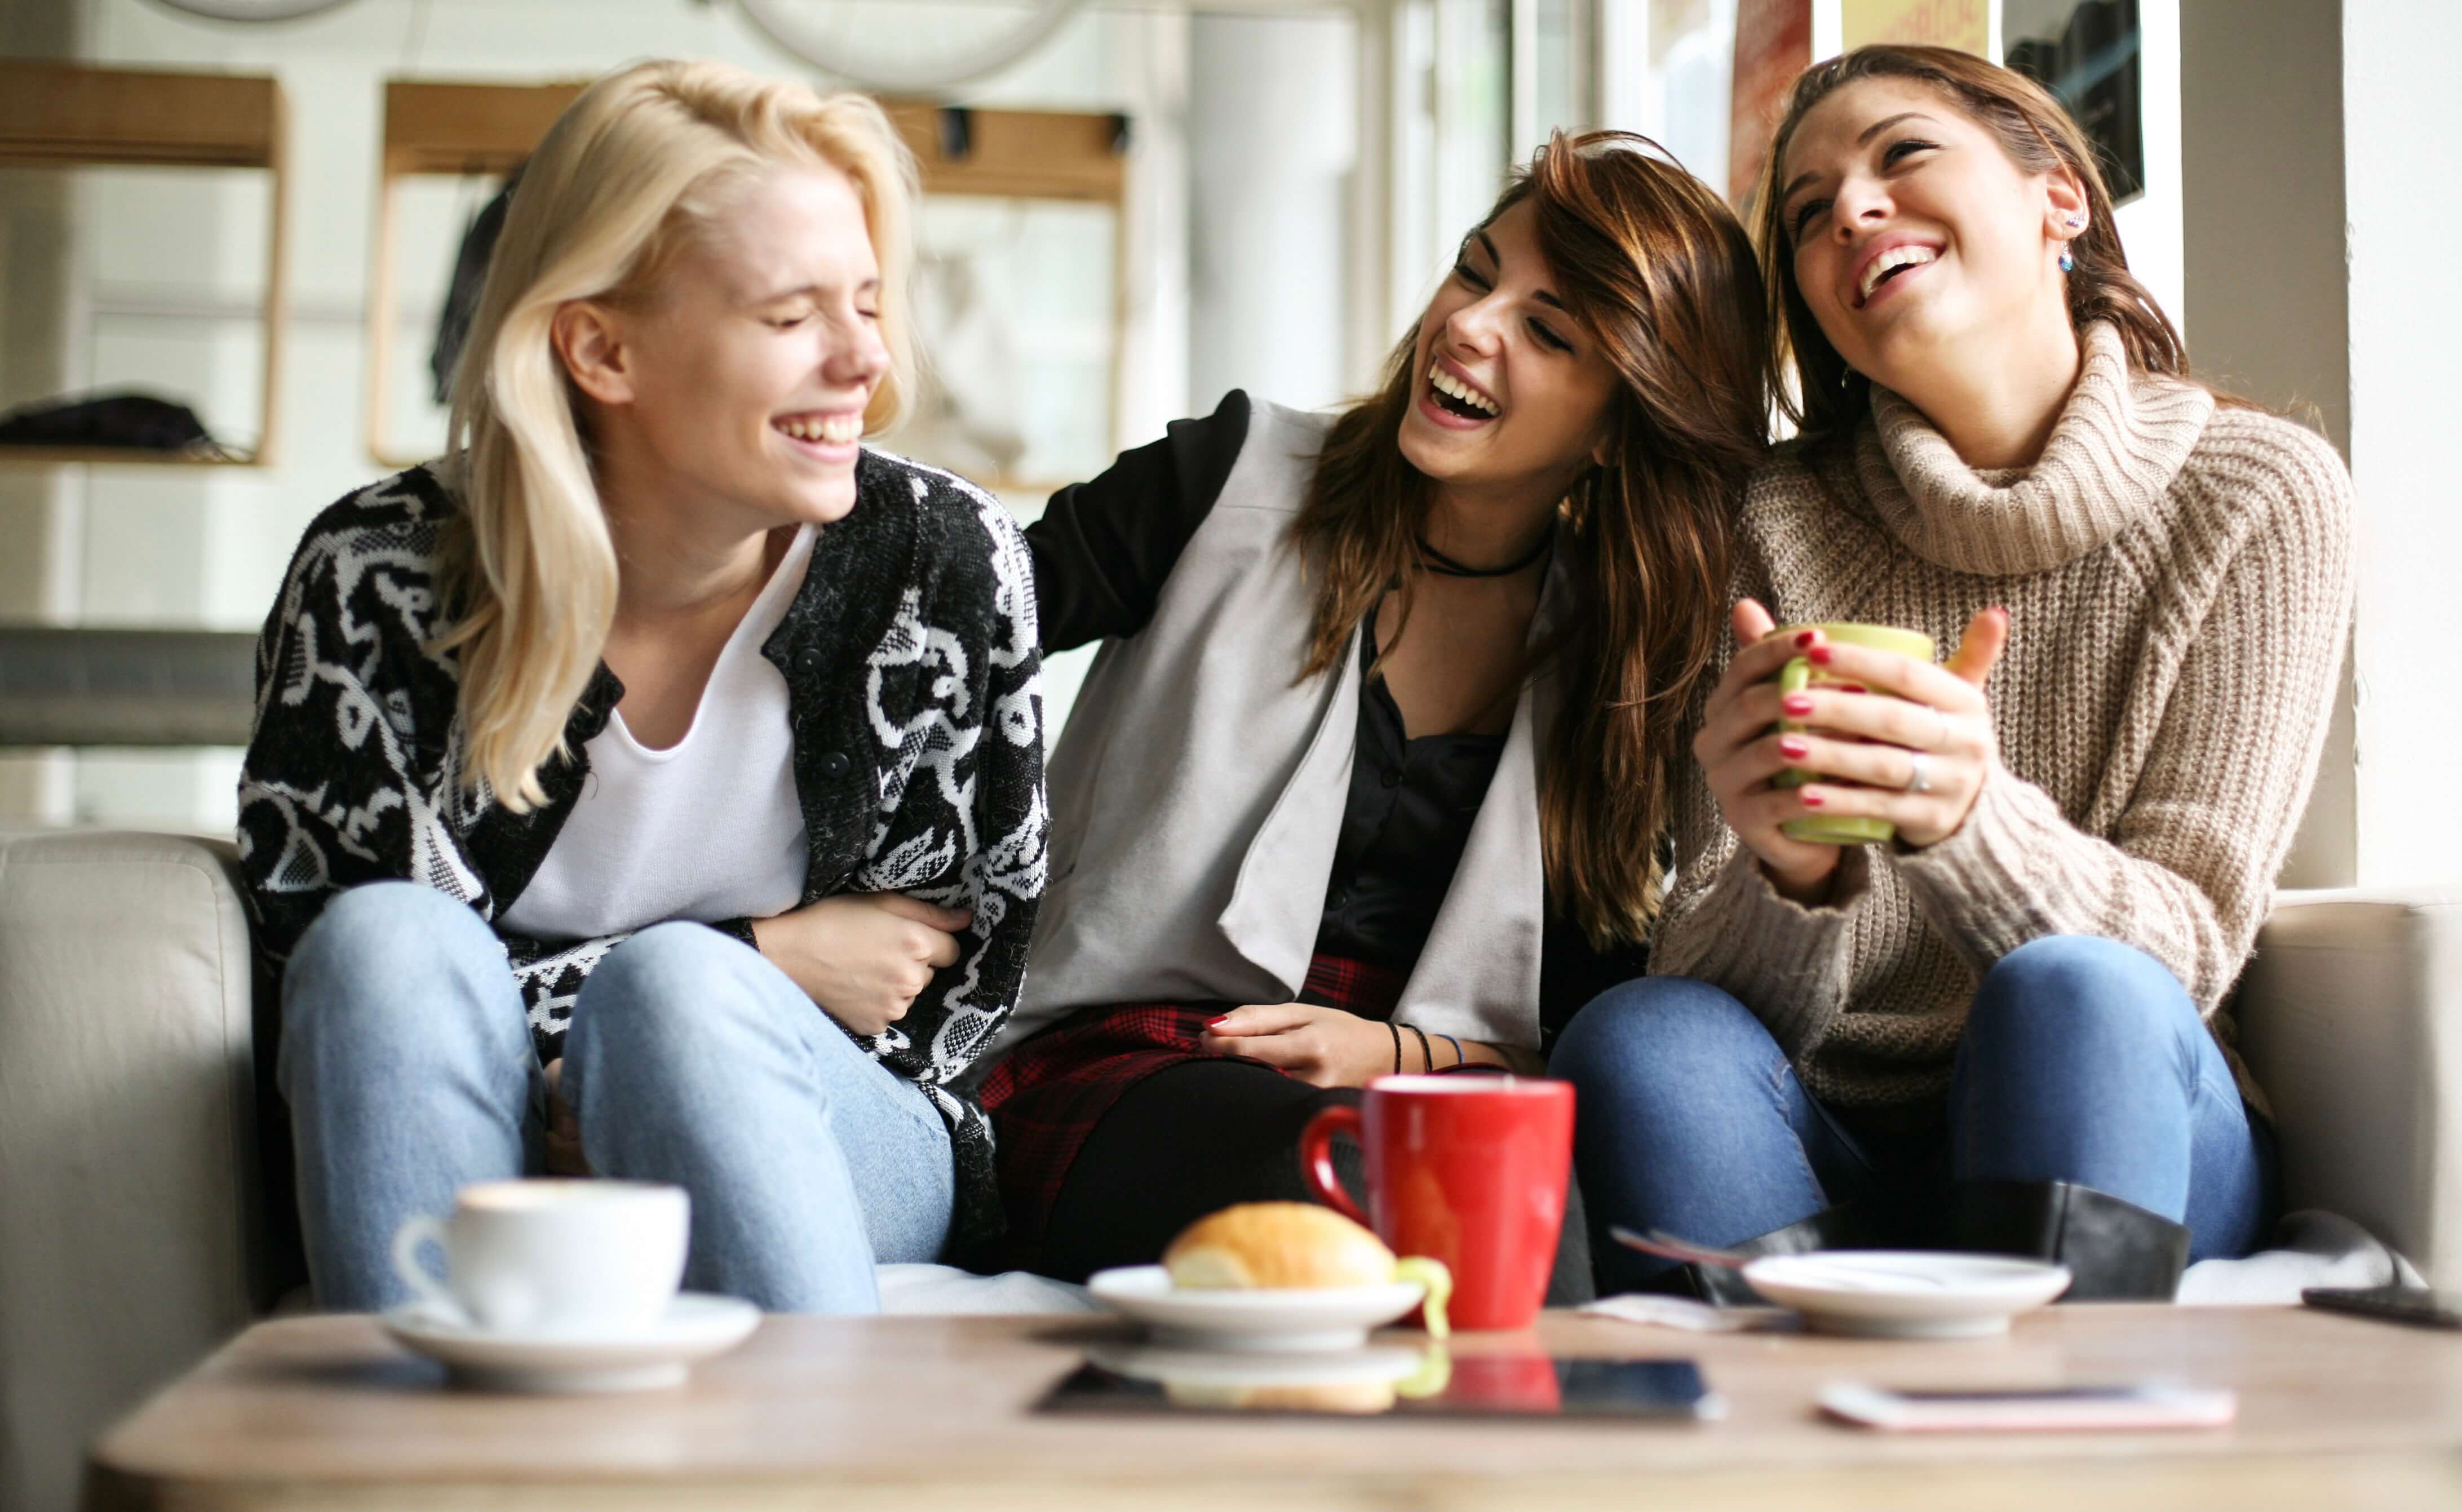 girls laughing together over coffee